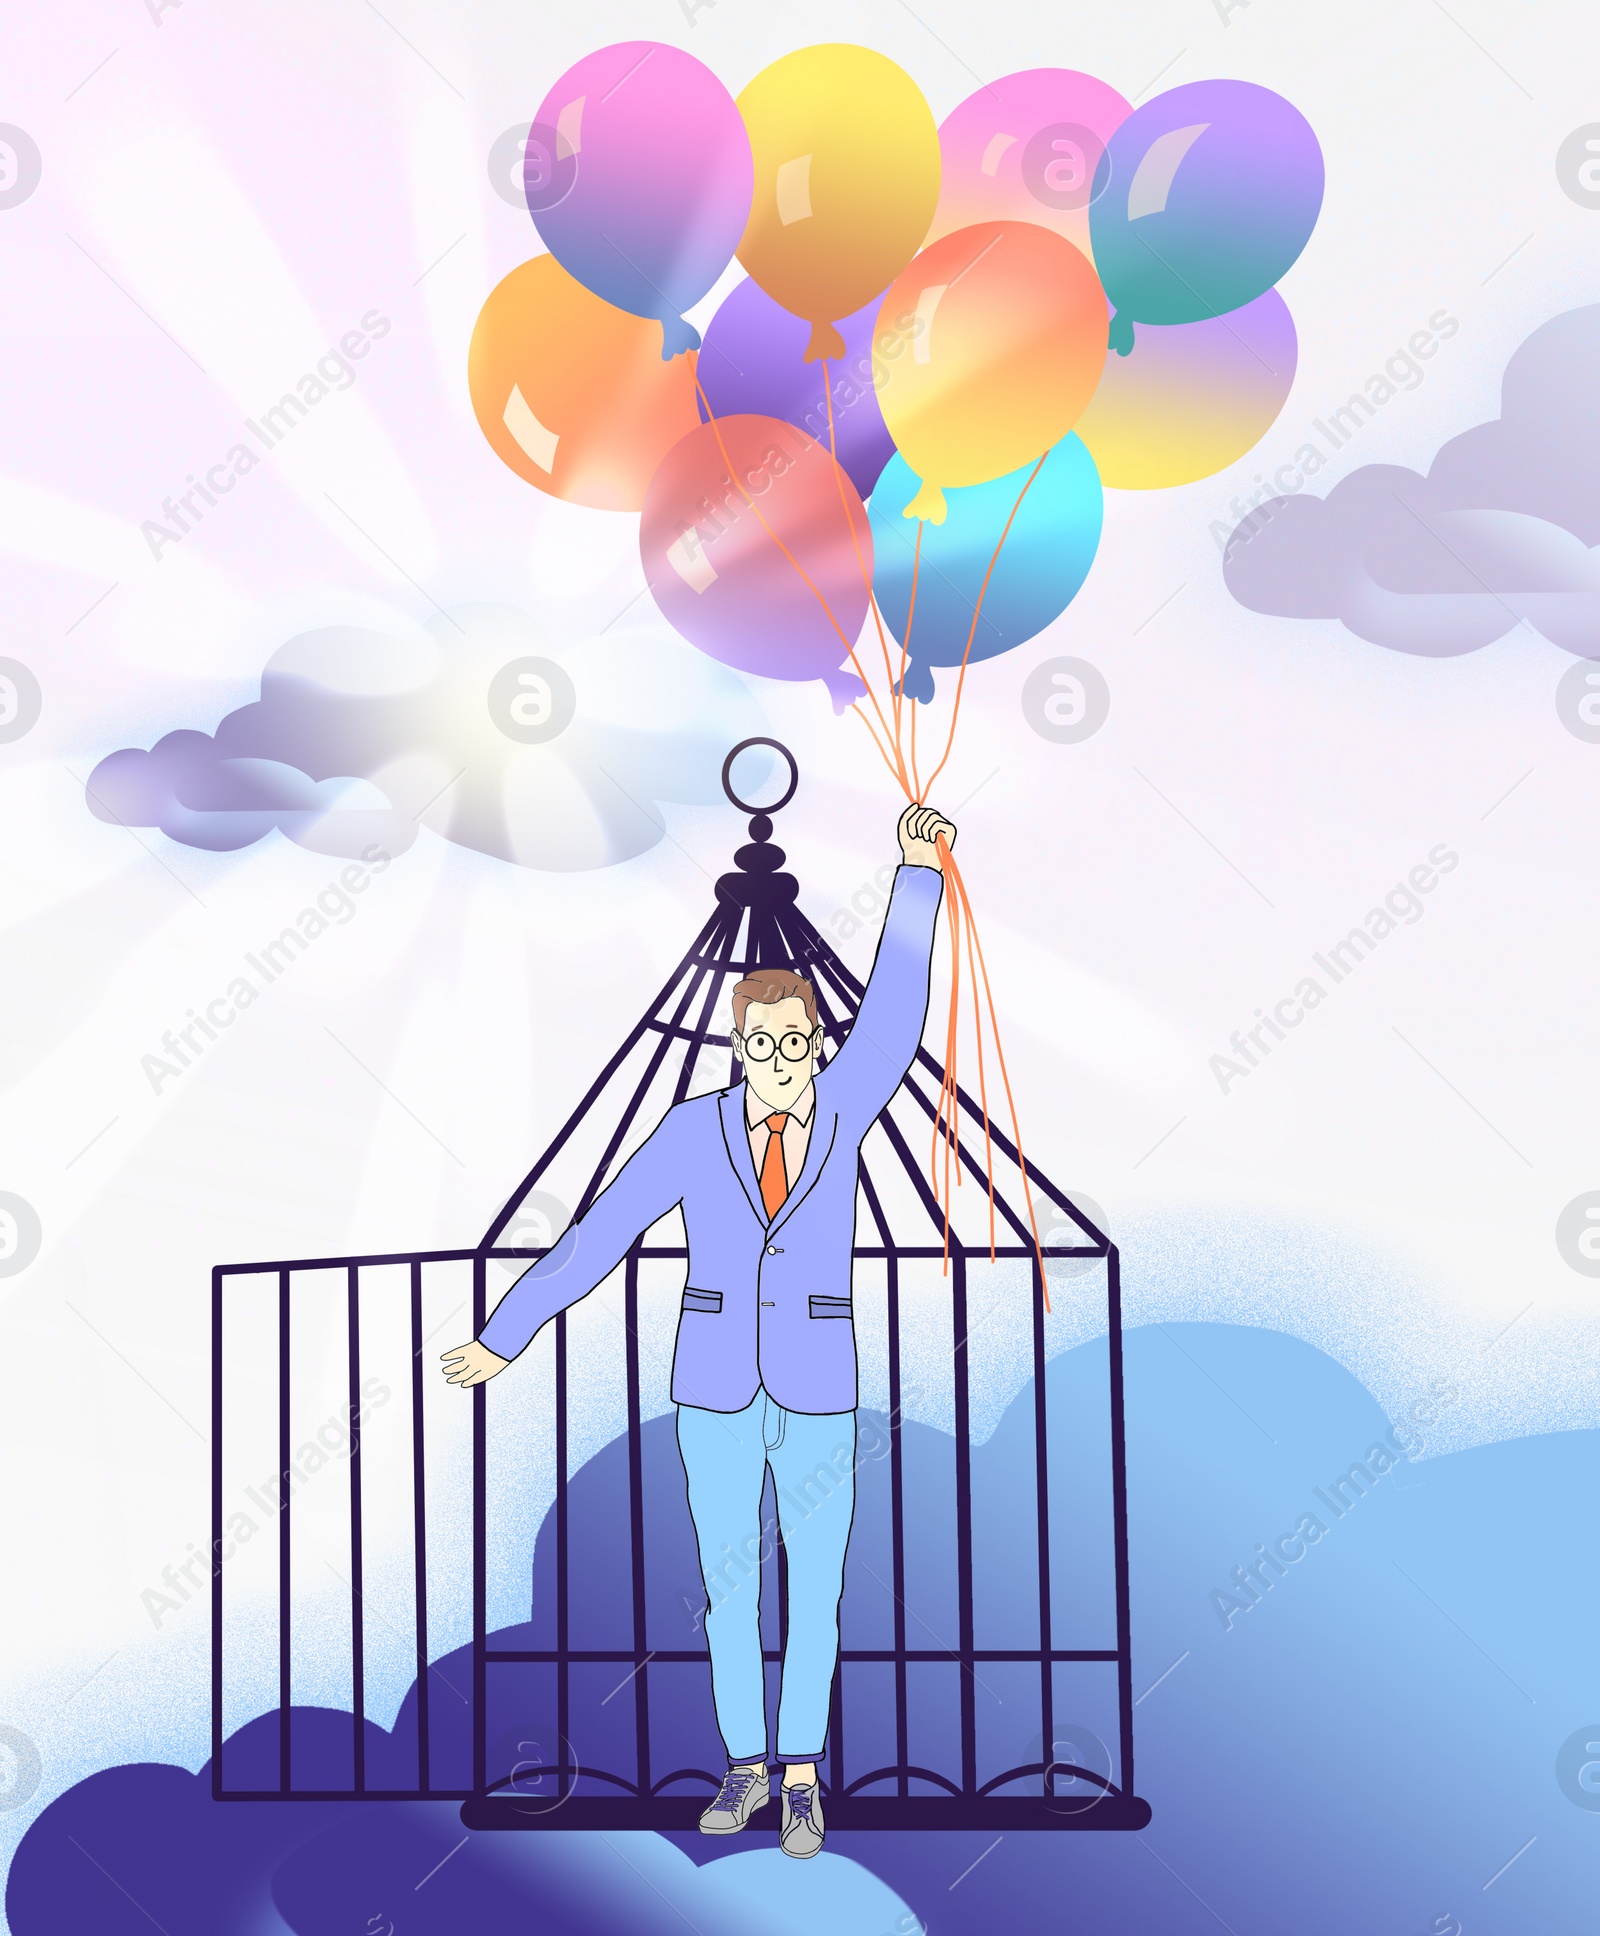 Illustration of Beautiful illustration demonstrating sense of freedom. Man with bunch of balloons leaving cage